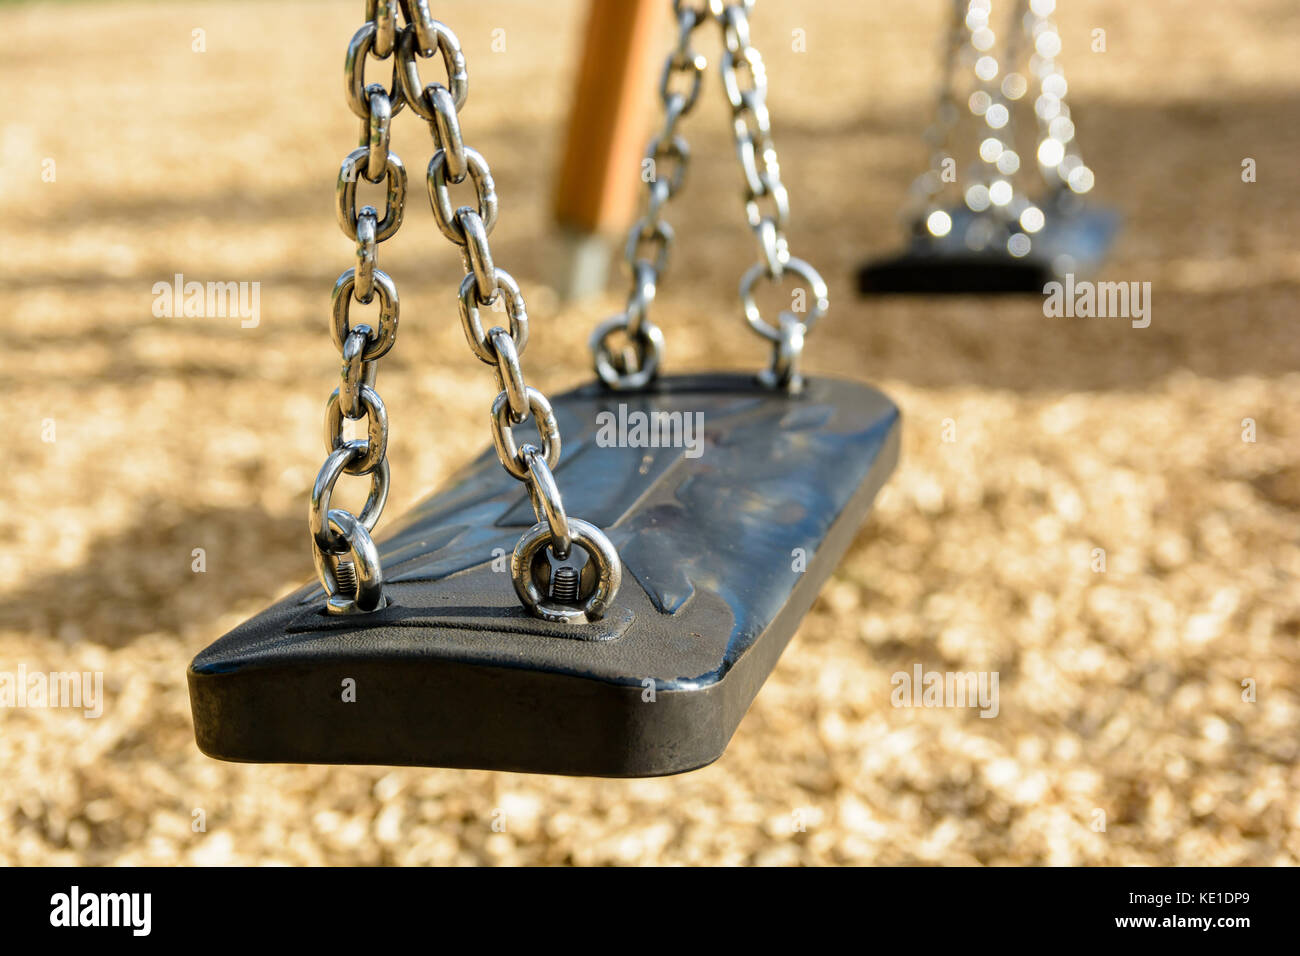 Close-up view of a still child's swing in black plastic in a wood chips covered playground with chrome chains and drop shadow. Stock Photo